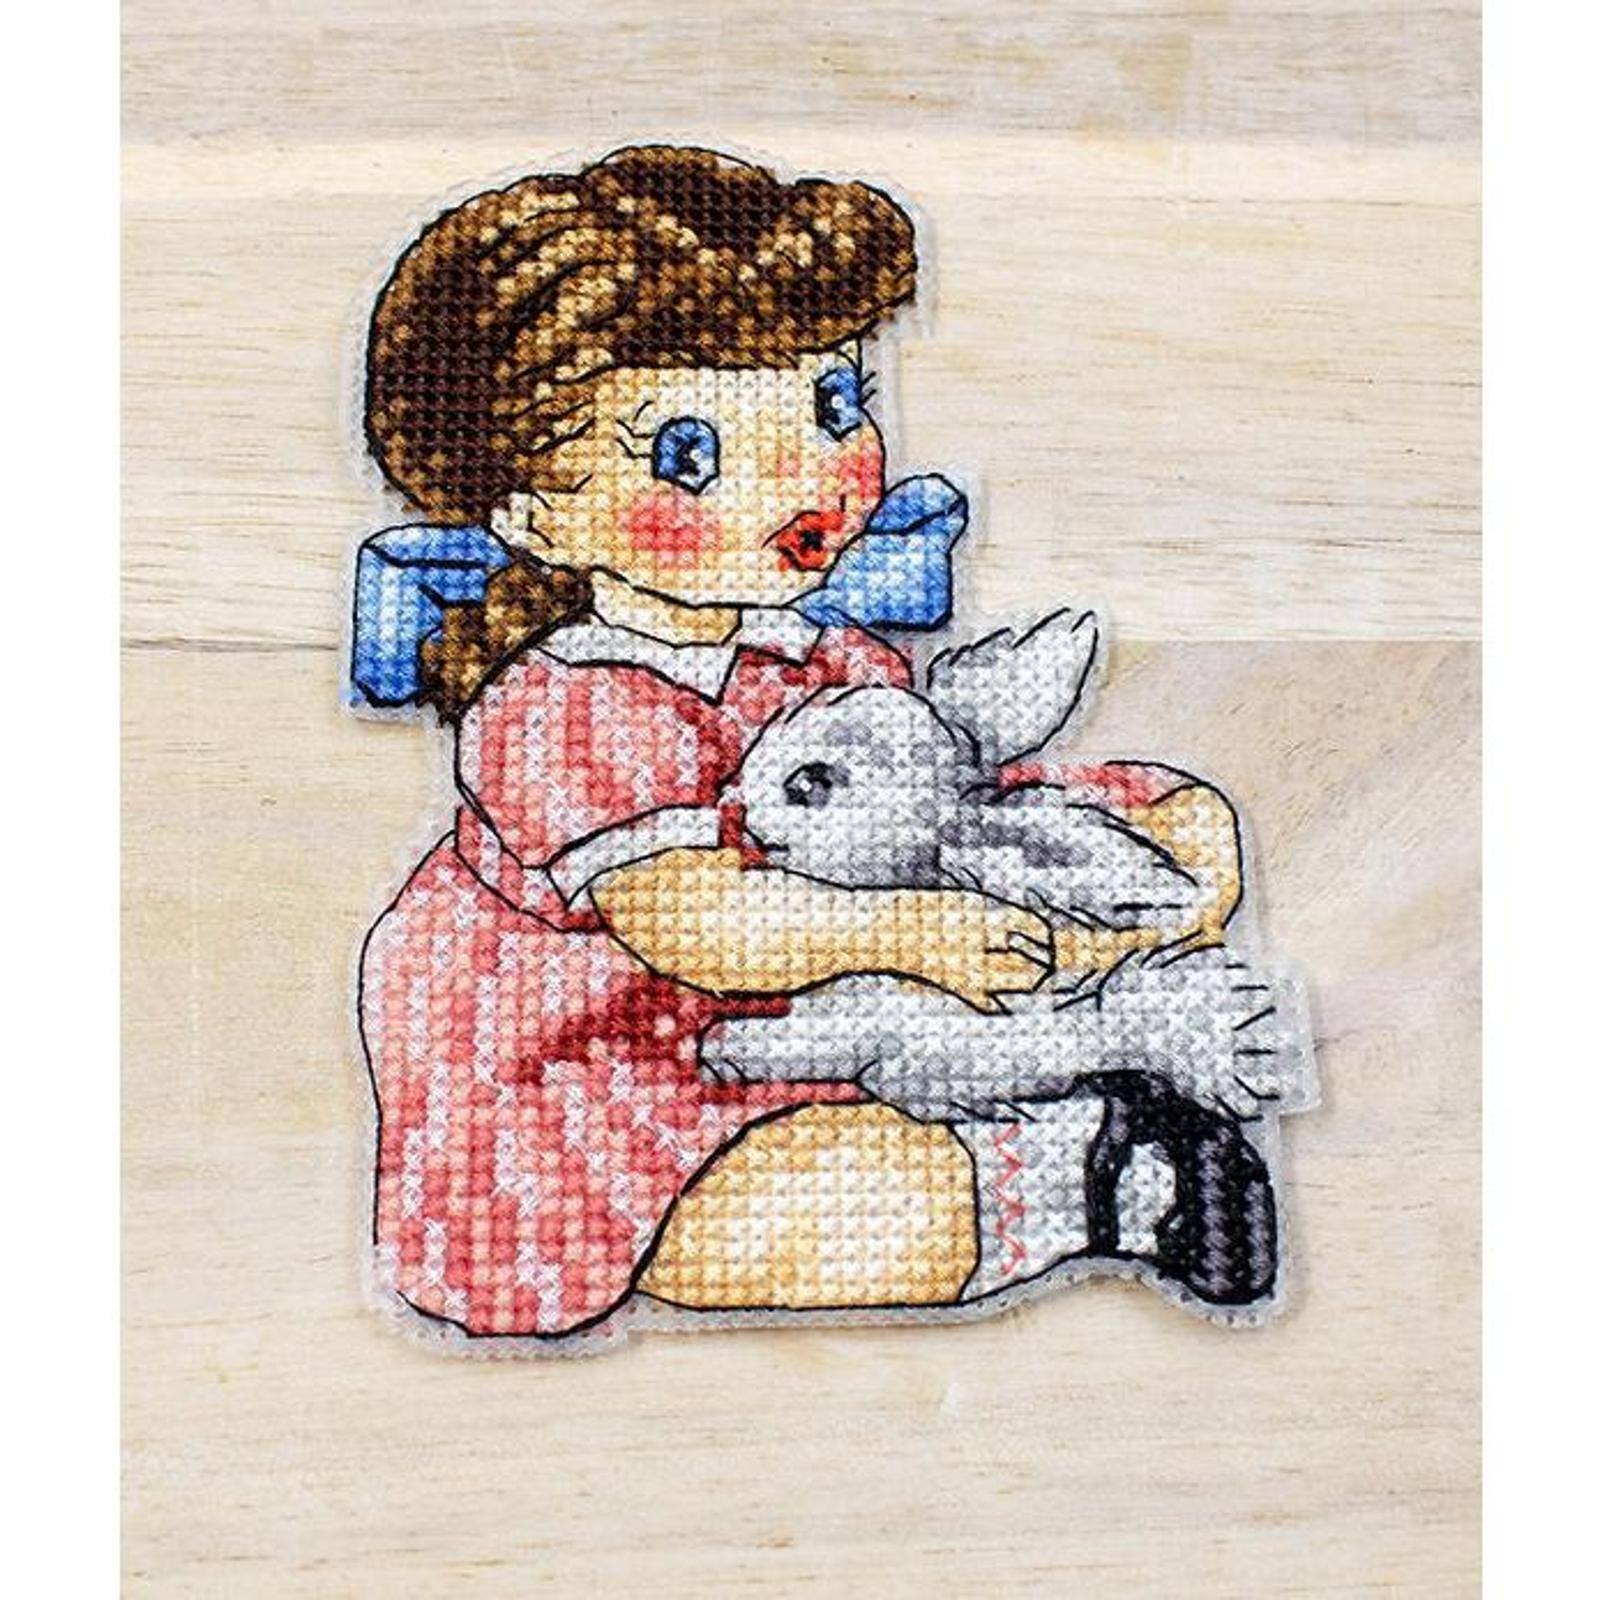 Letistitch Plastic Canvas Counted Cross Stitch Kit Easter Ornaments Kit, 8Ct.